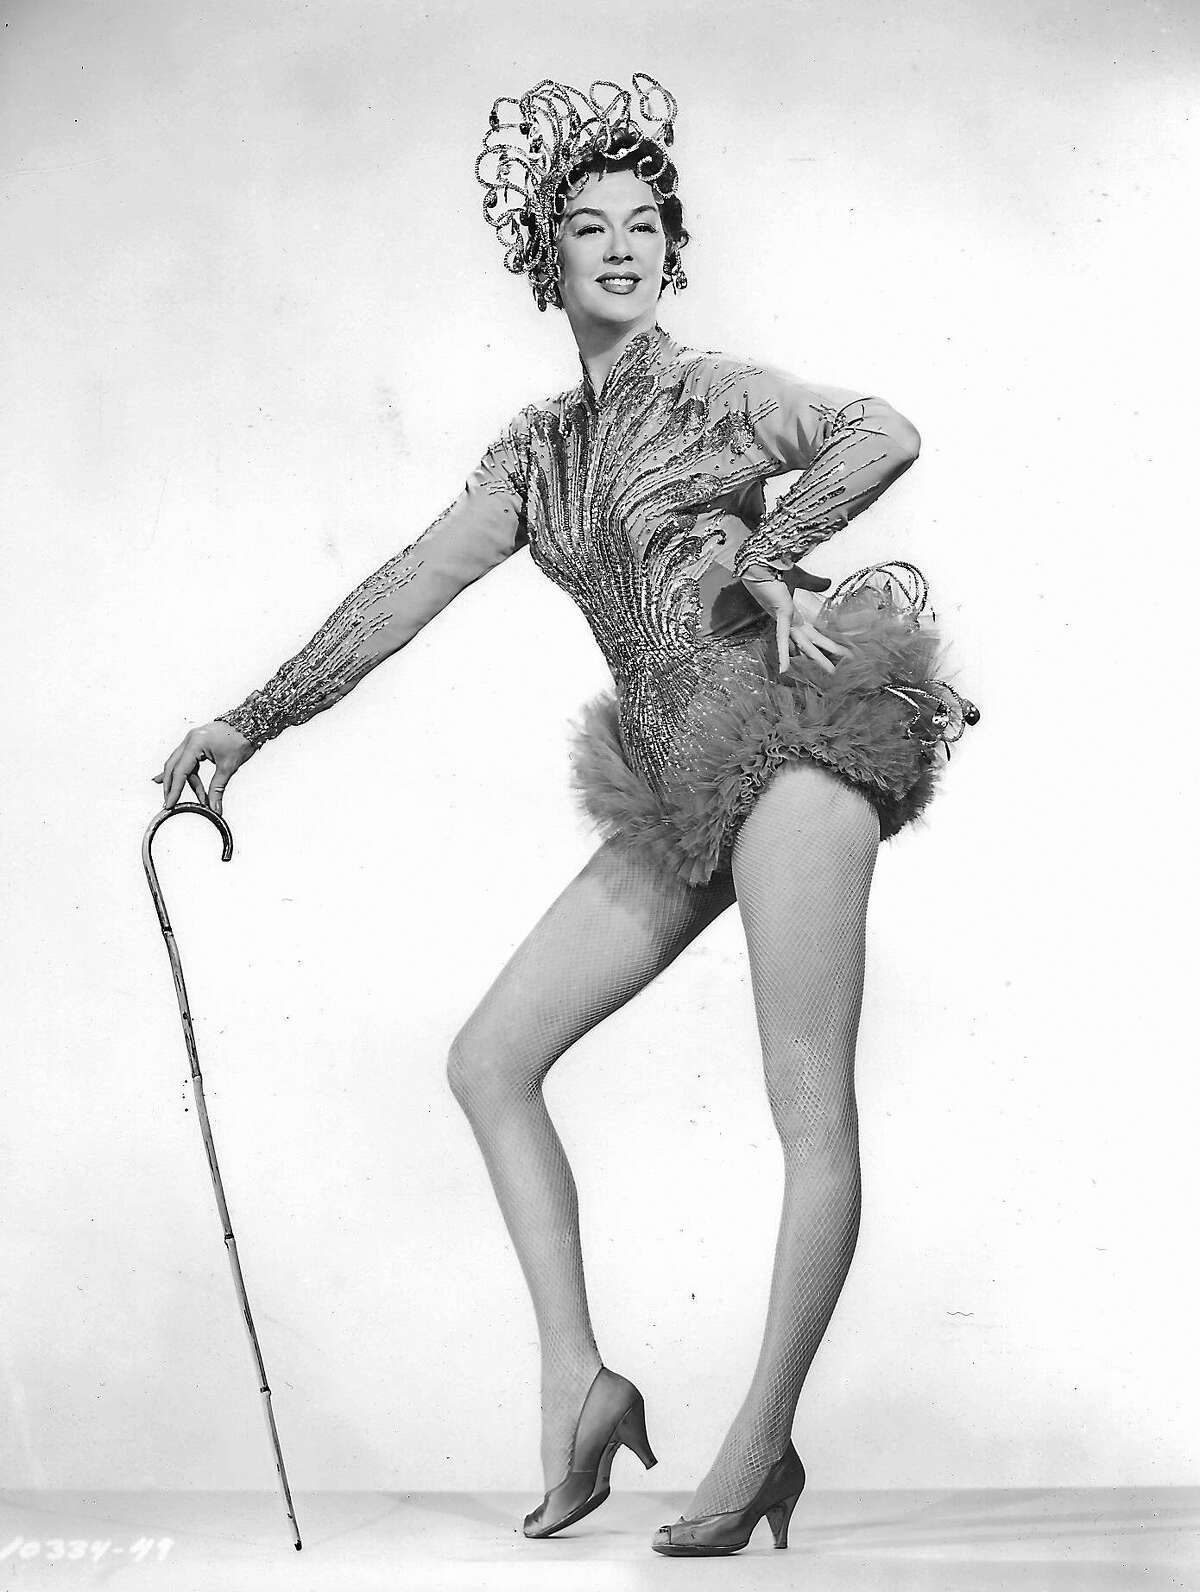 Contributed photoA program on the amazing career of Rosalind Russell will be held at the Mattatuck Museum on June 8.